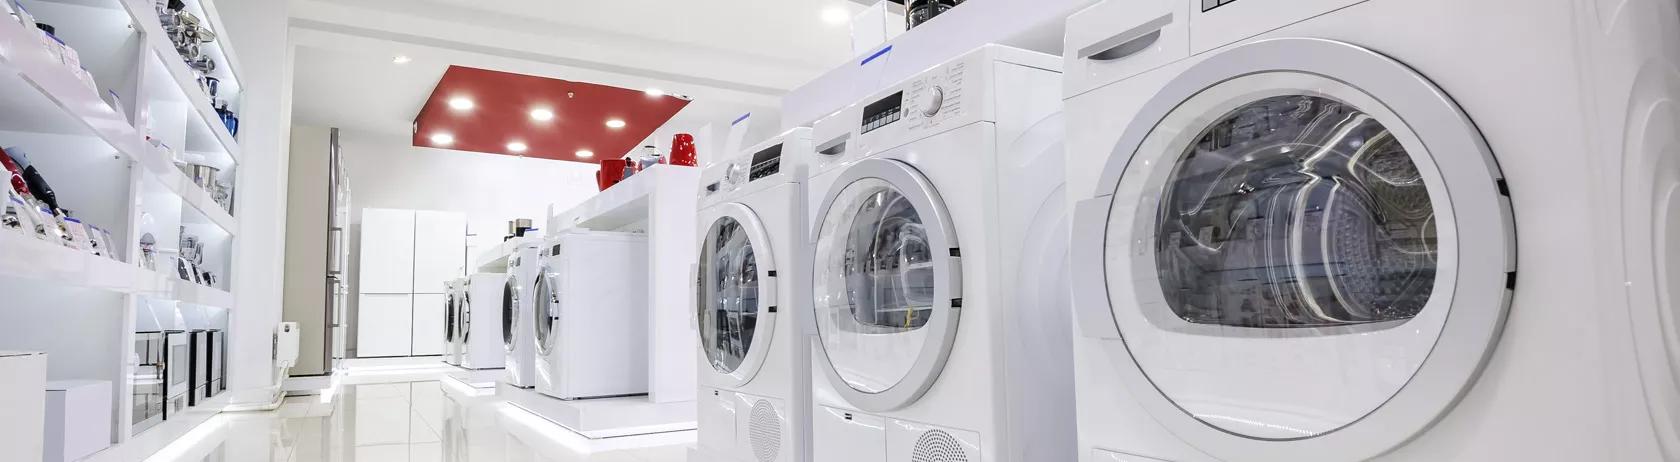 Rows of home appliances and washing machines in a retail store